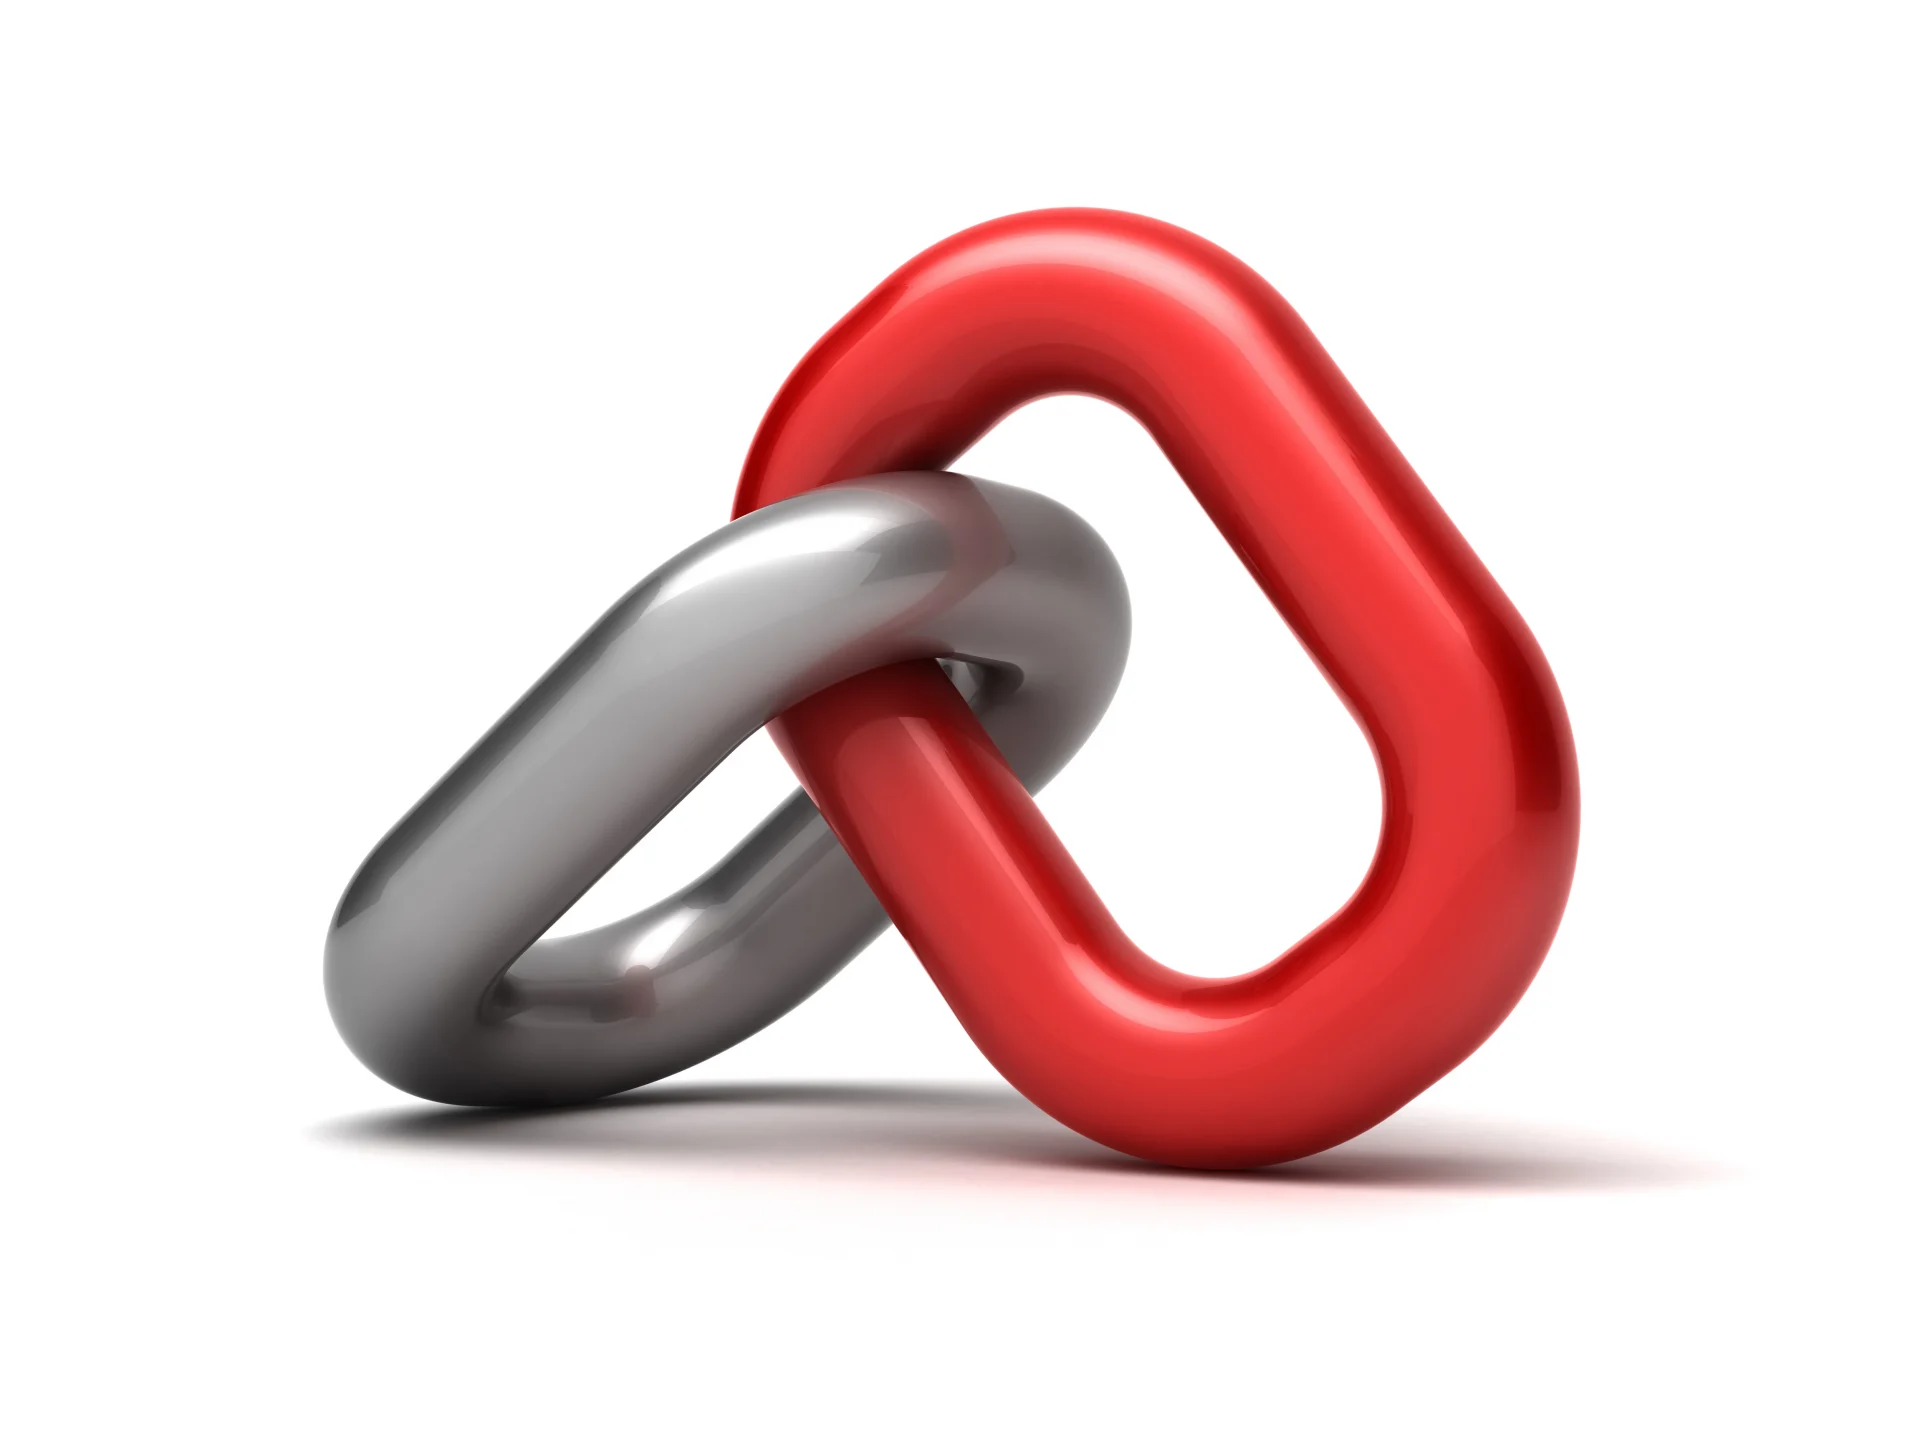 Two links from different chains chained together. One red, the other gray. White background. The purpose is to visualize SEO link building.